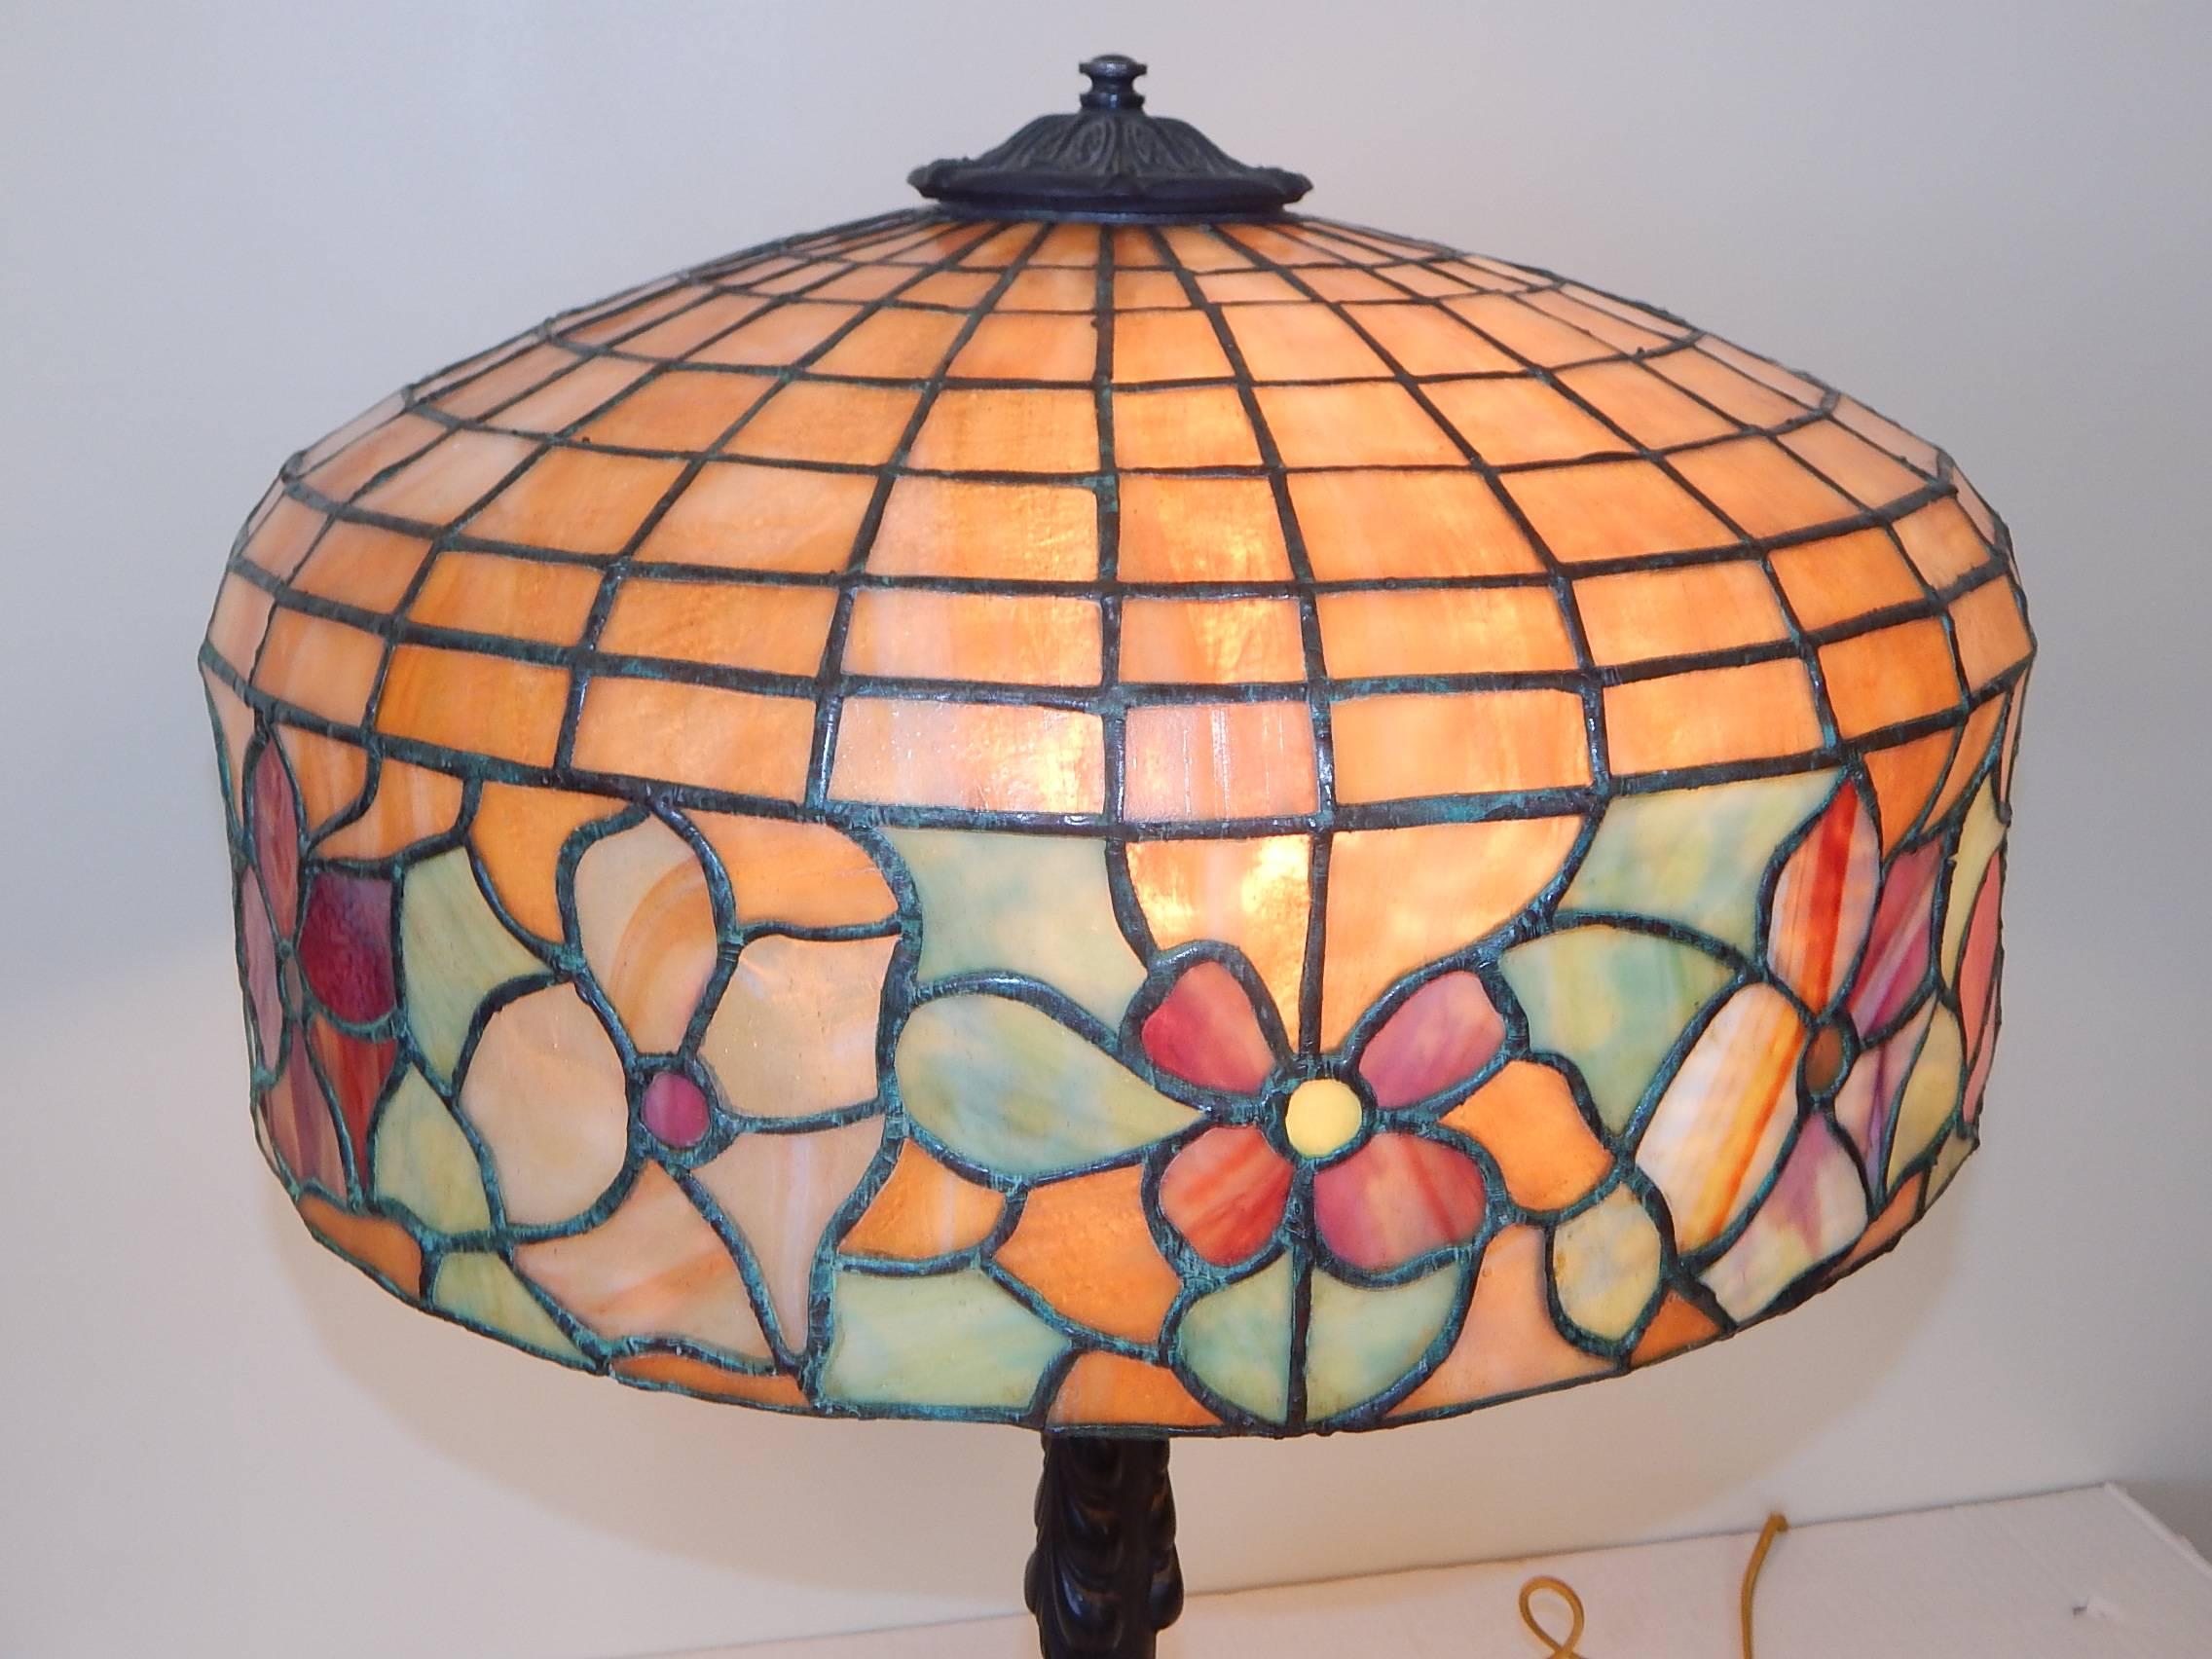 A lovely and good size antique leaded glass table lamp, with vivid colors.
The beautiful top shade mounted on a dark green patinated metal base.
Shade is signed Bradley & Hubbard. This was a well-known company that produced these types of